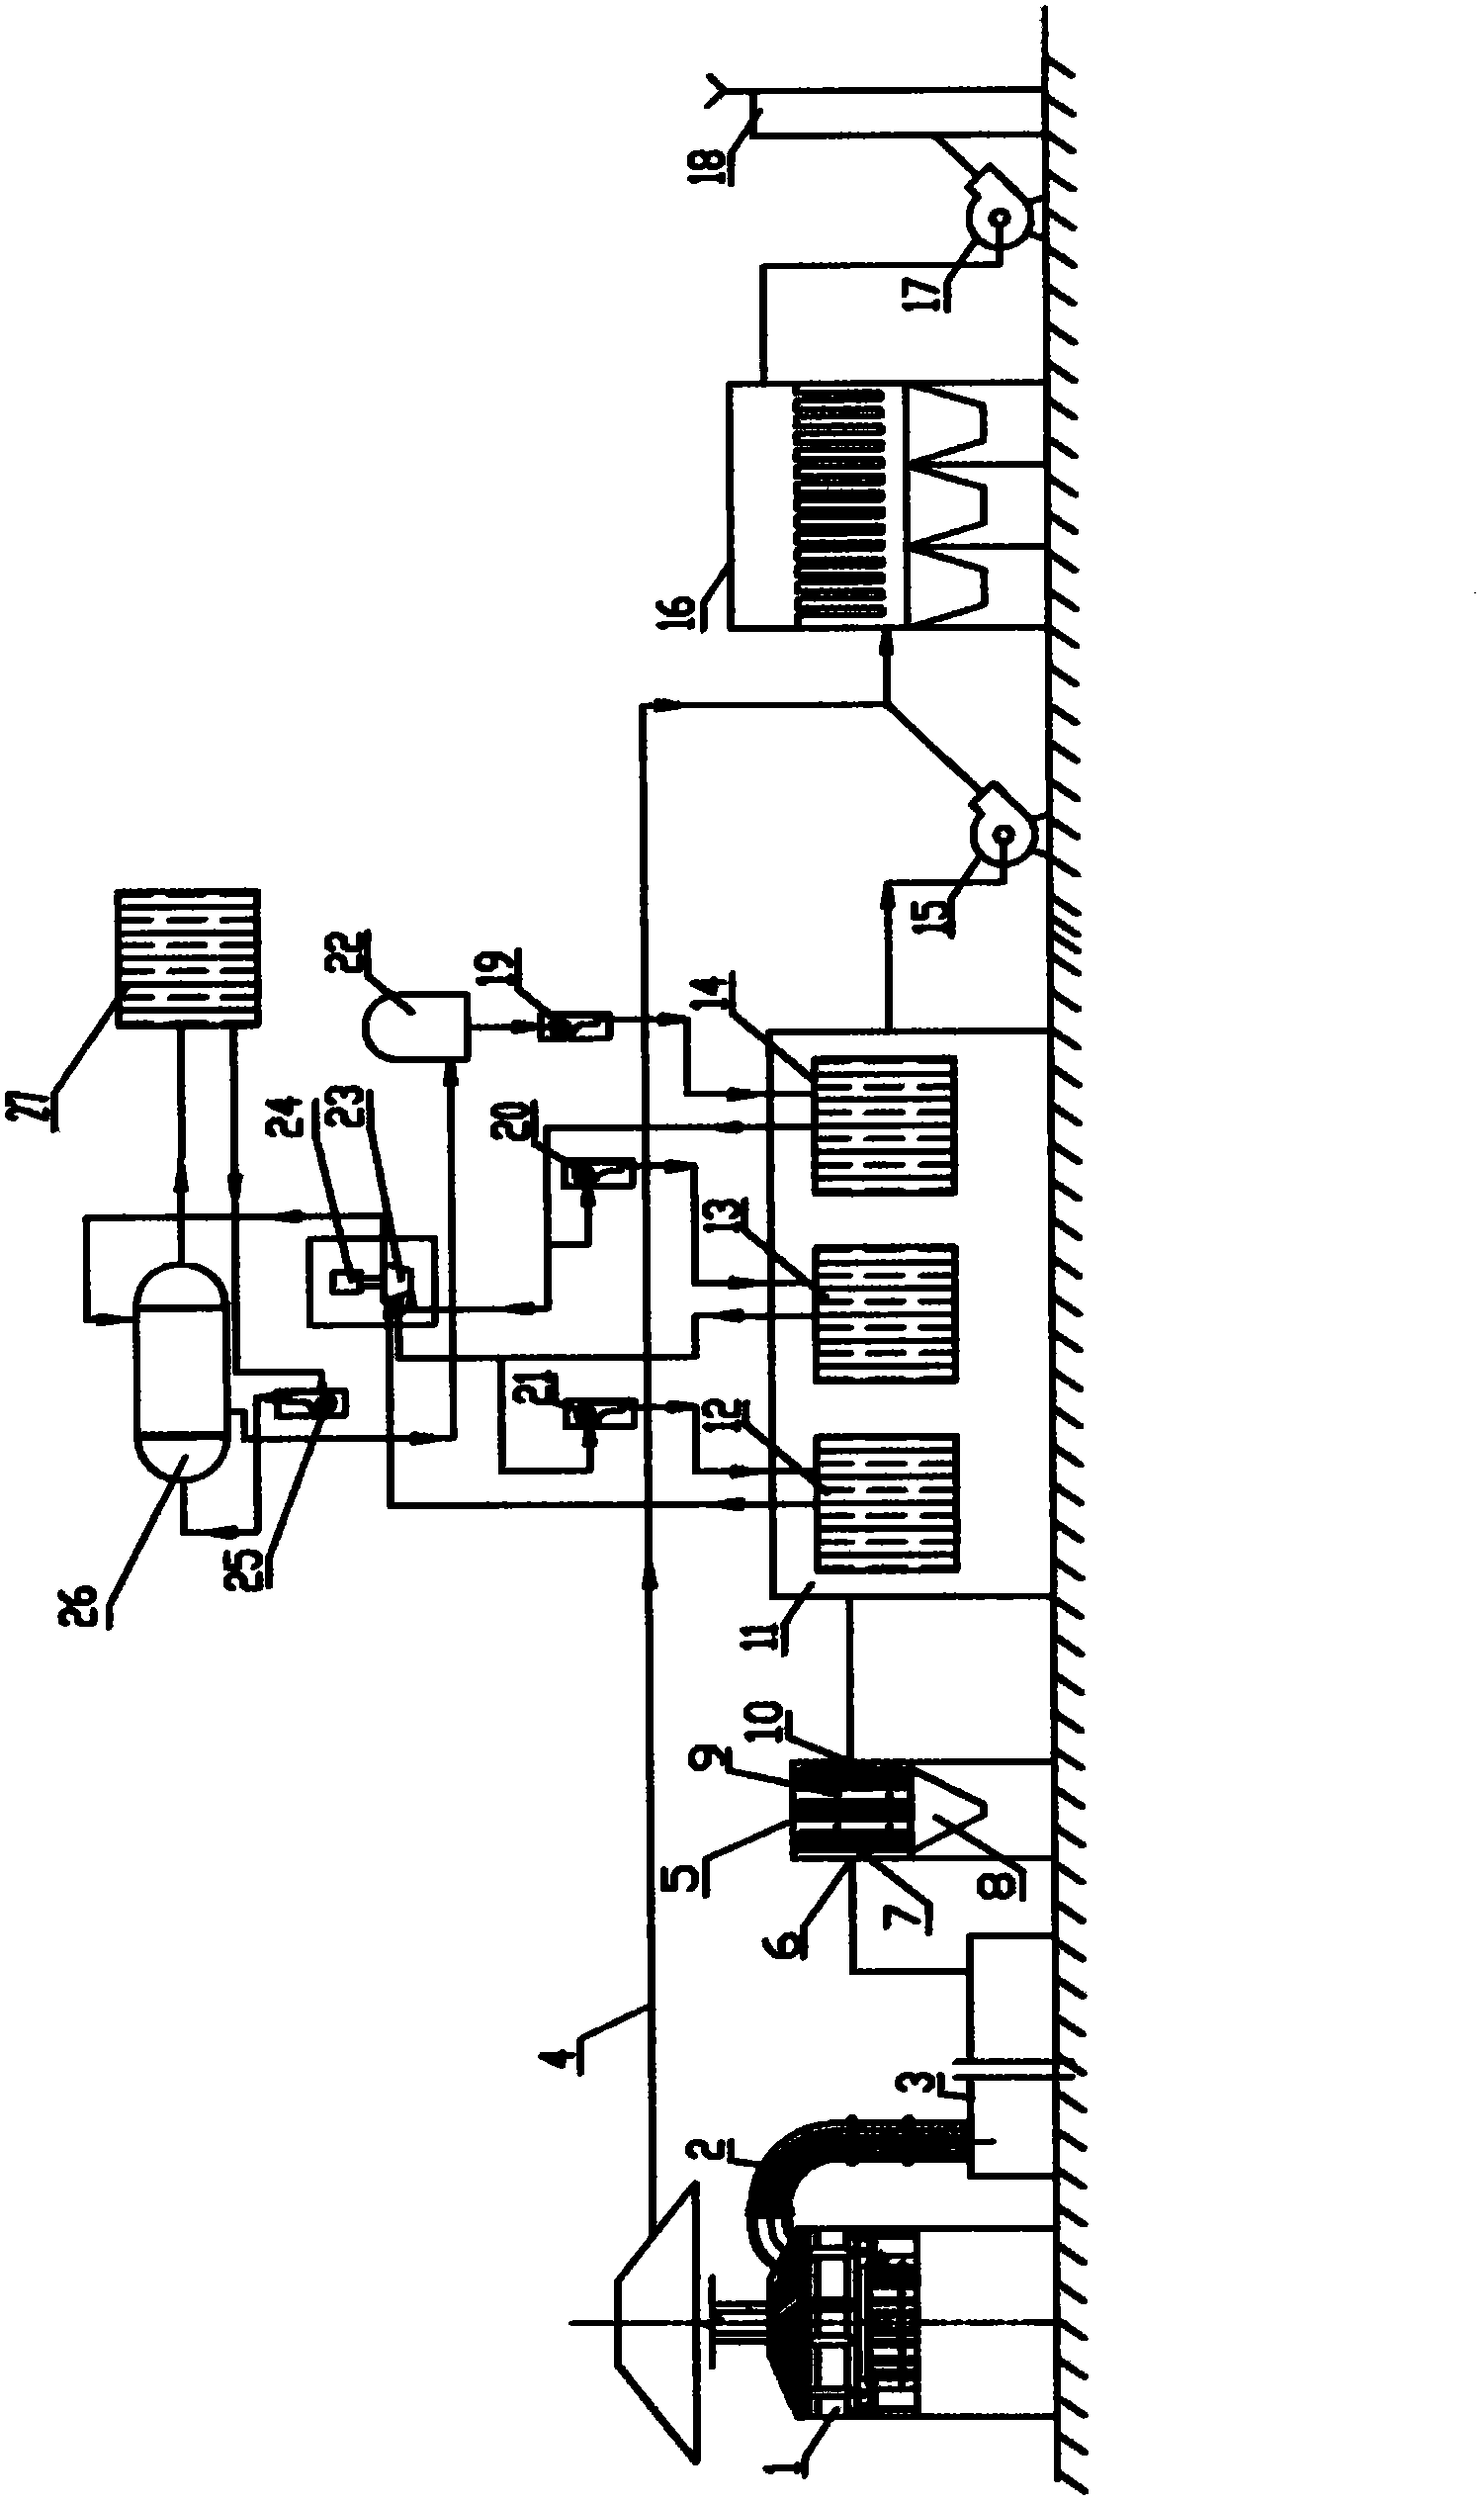 Method for power generation by utilizing flue gas waste heat of semi-sealed electric furnace